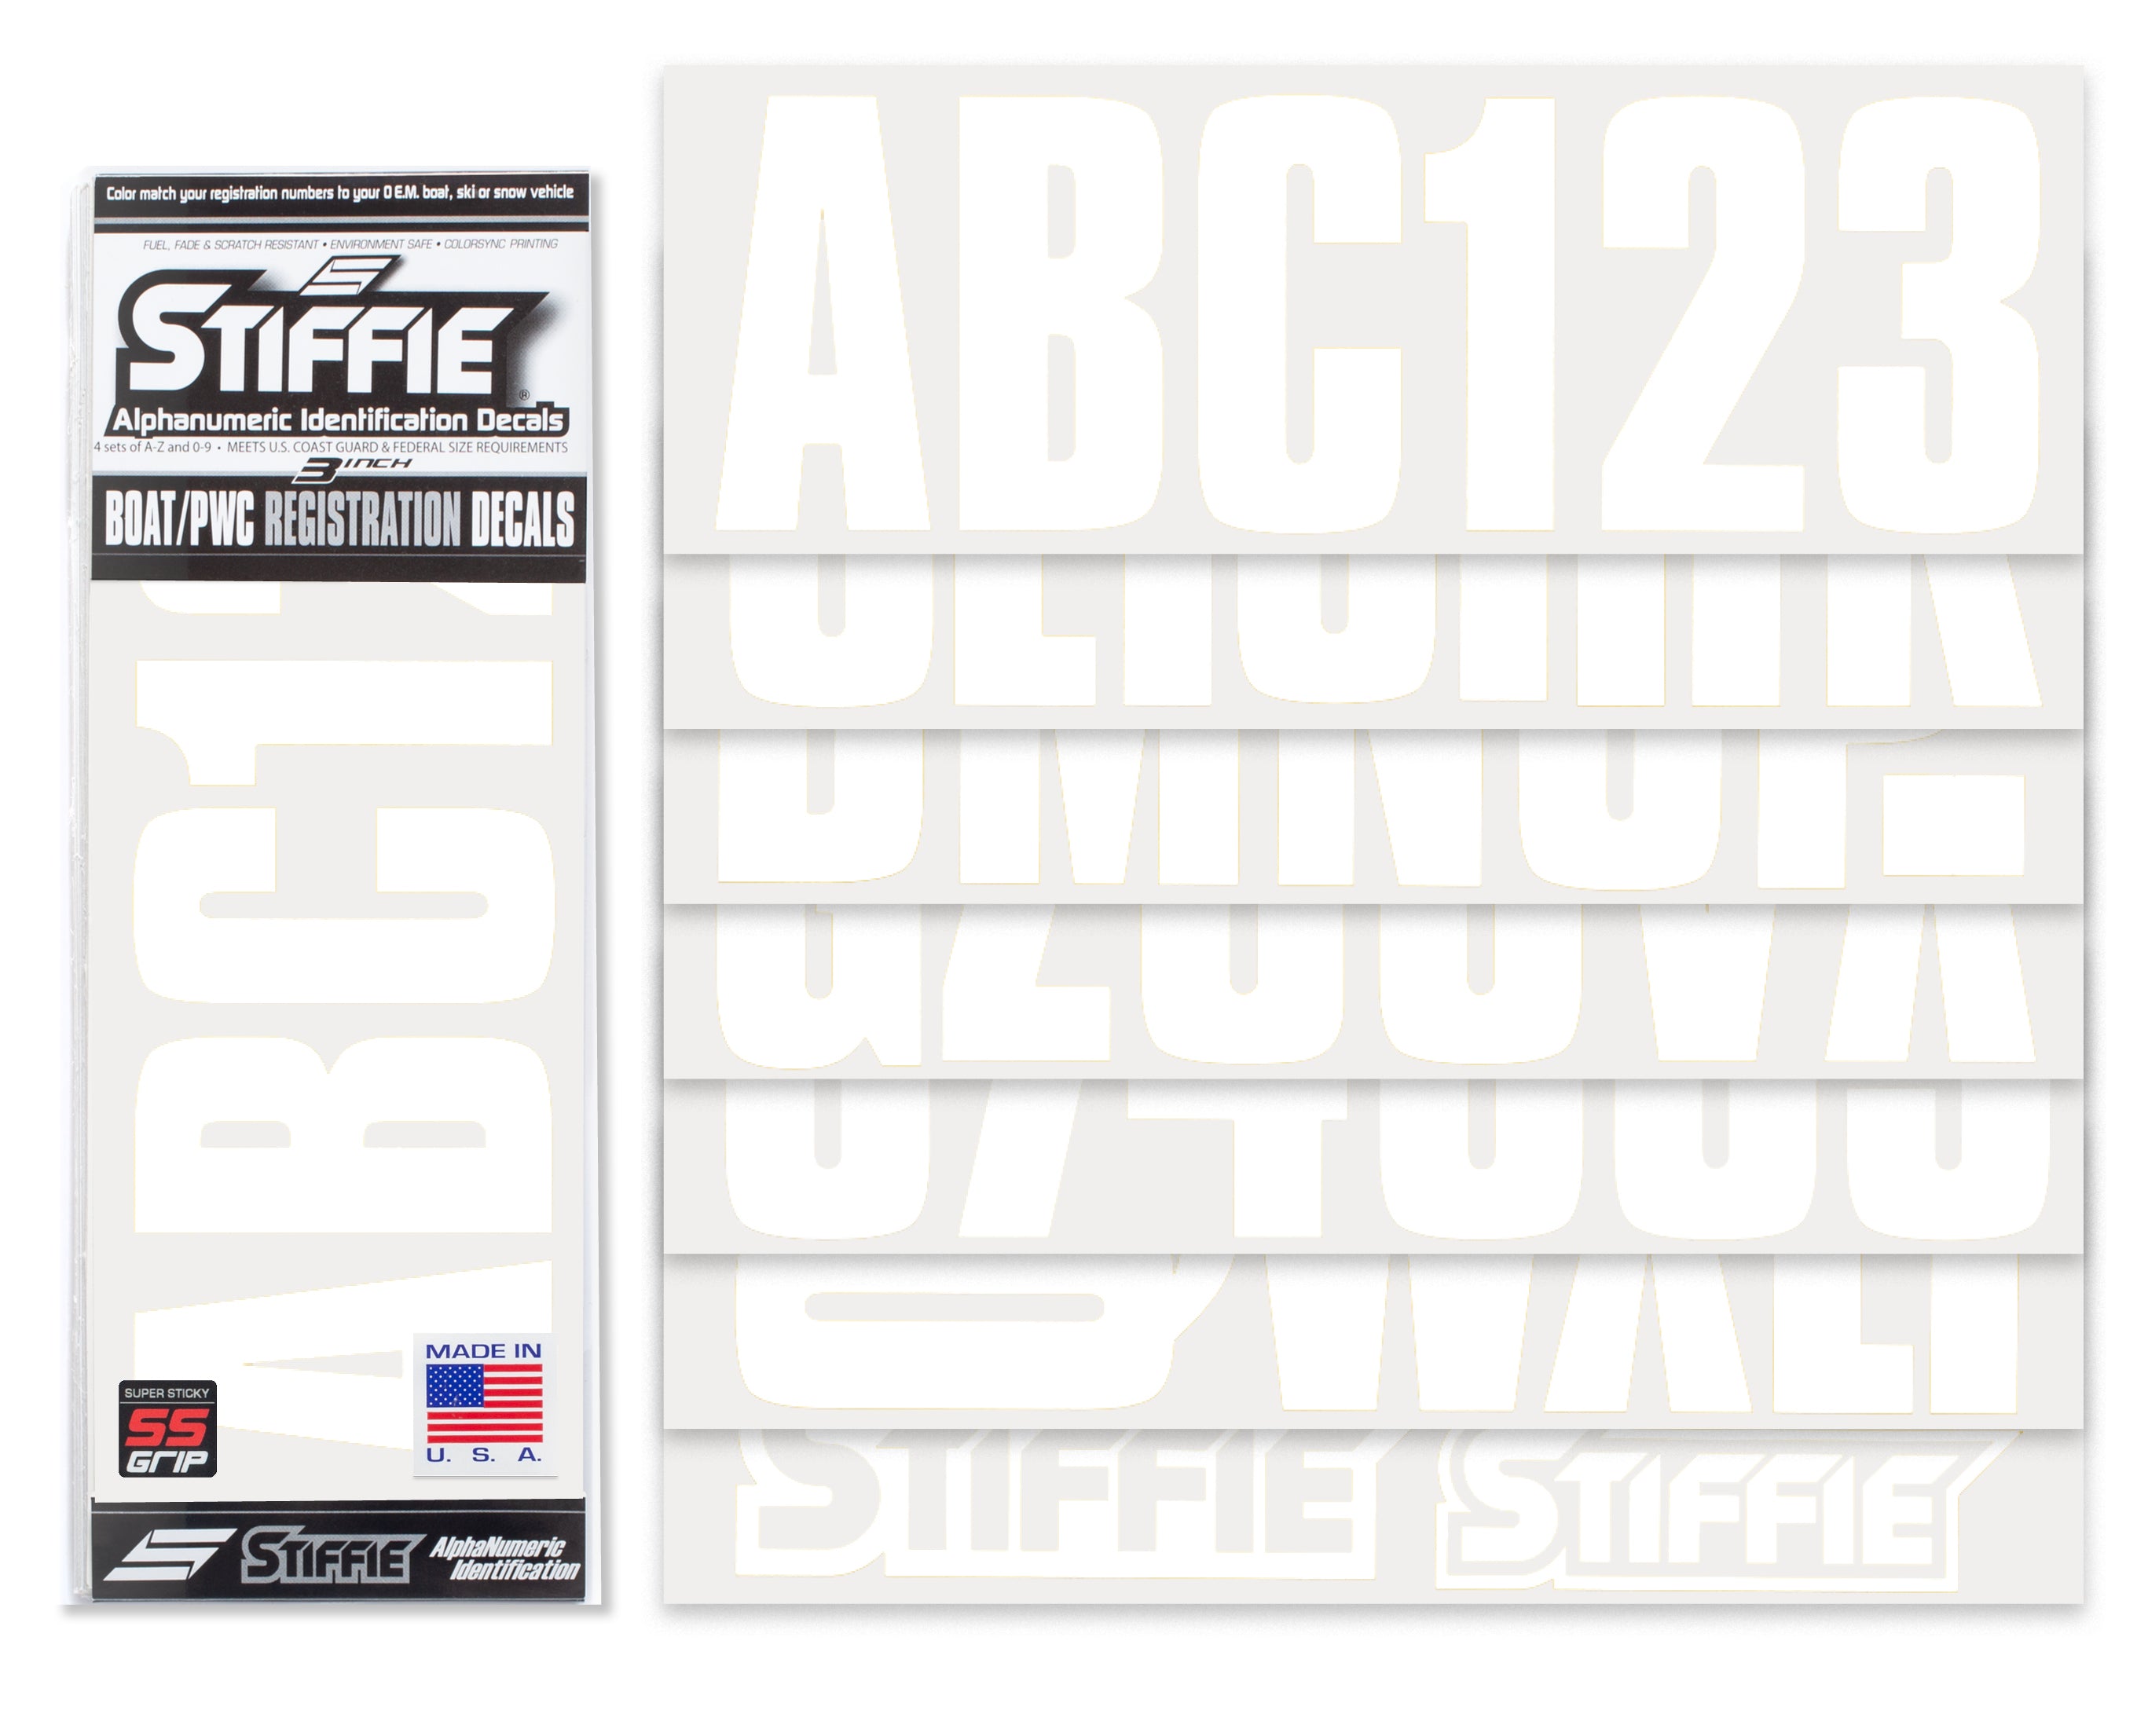 STIFFIE Uniline White Super Sticky 3" Alpha Numeric Registration Identification Numbers Stickers Decals for Sea-Doo Spark, Inflatable Boats, Ribs, Hypalon/PVC, PWC and Boats